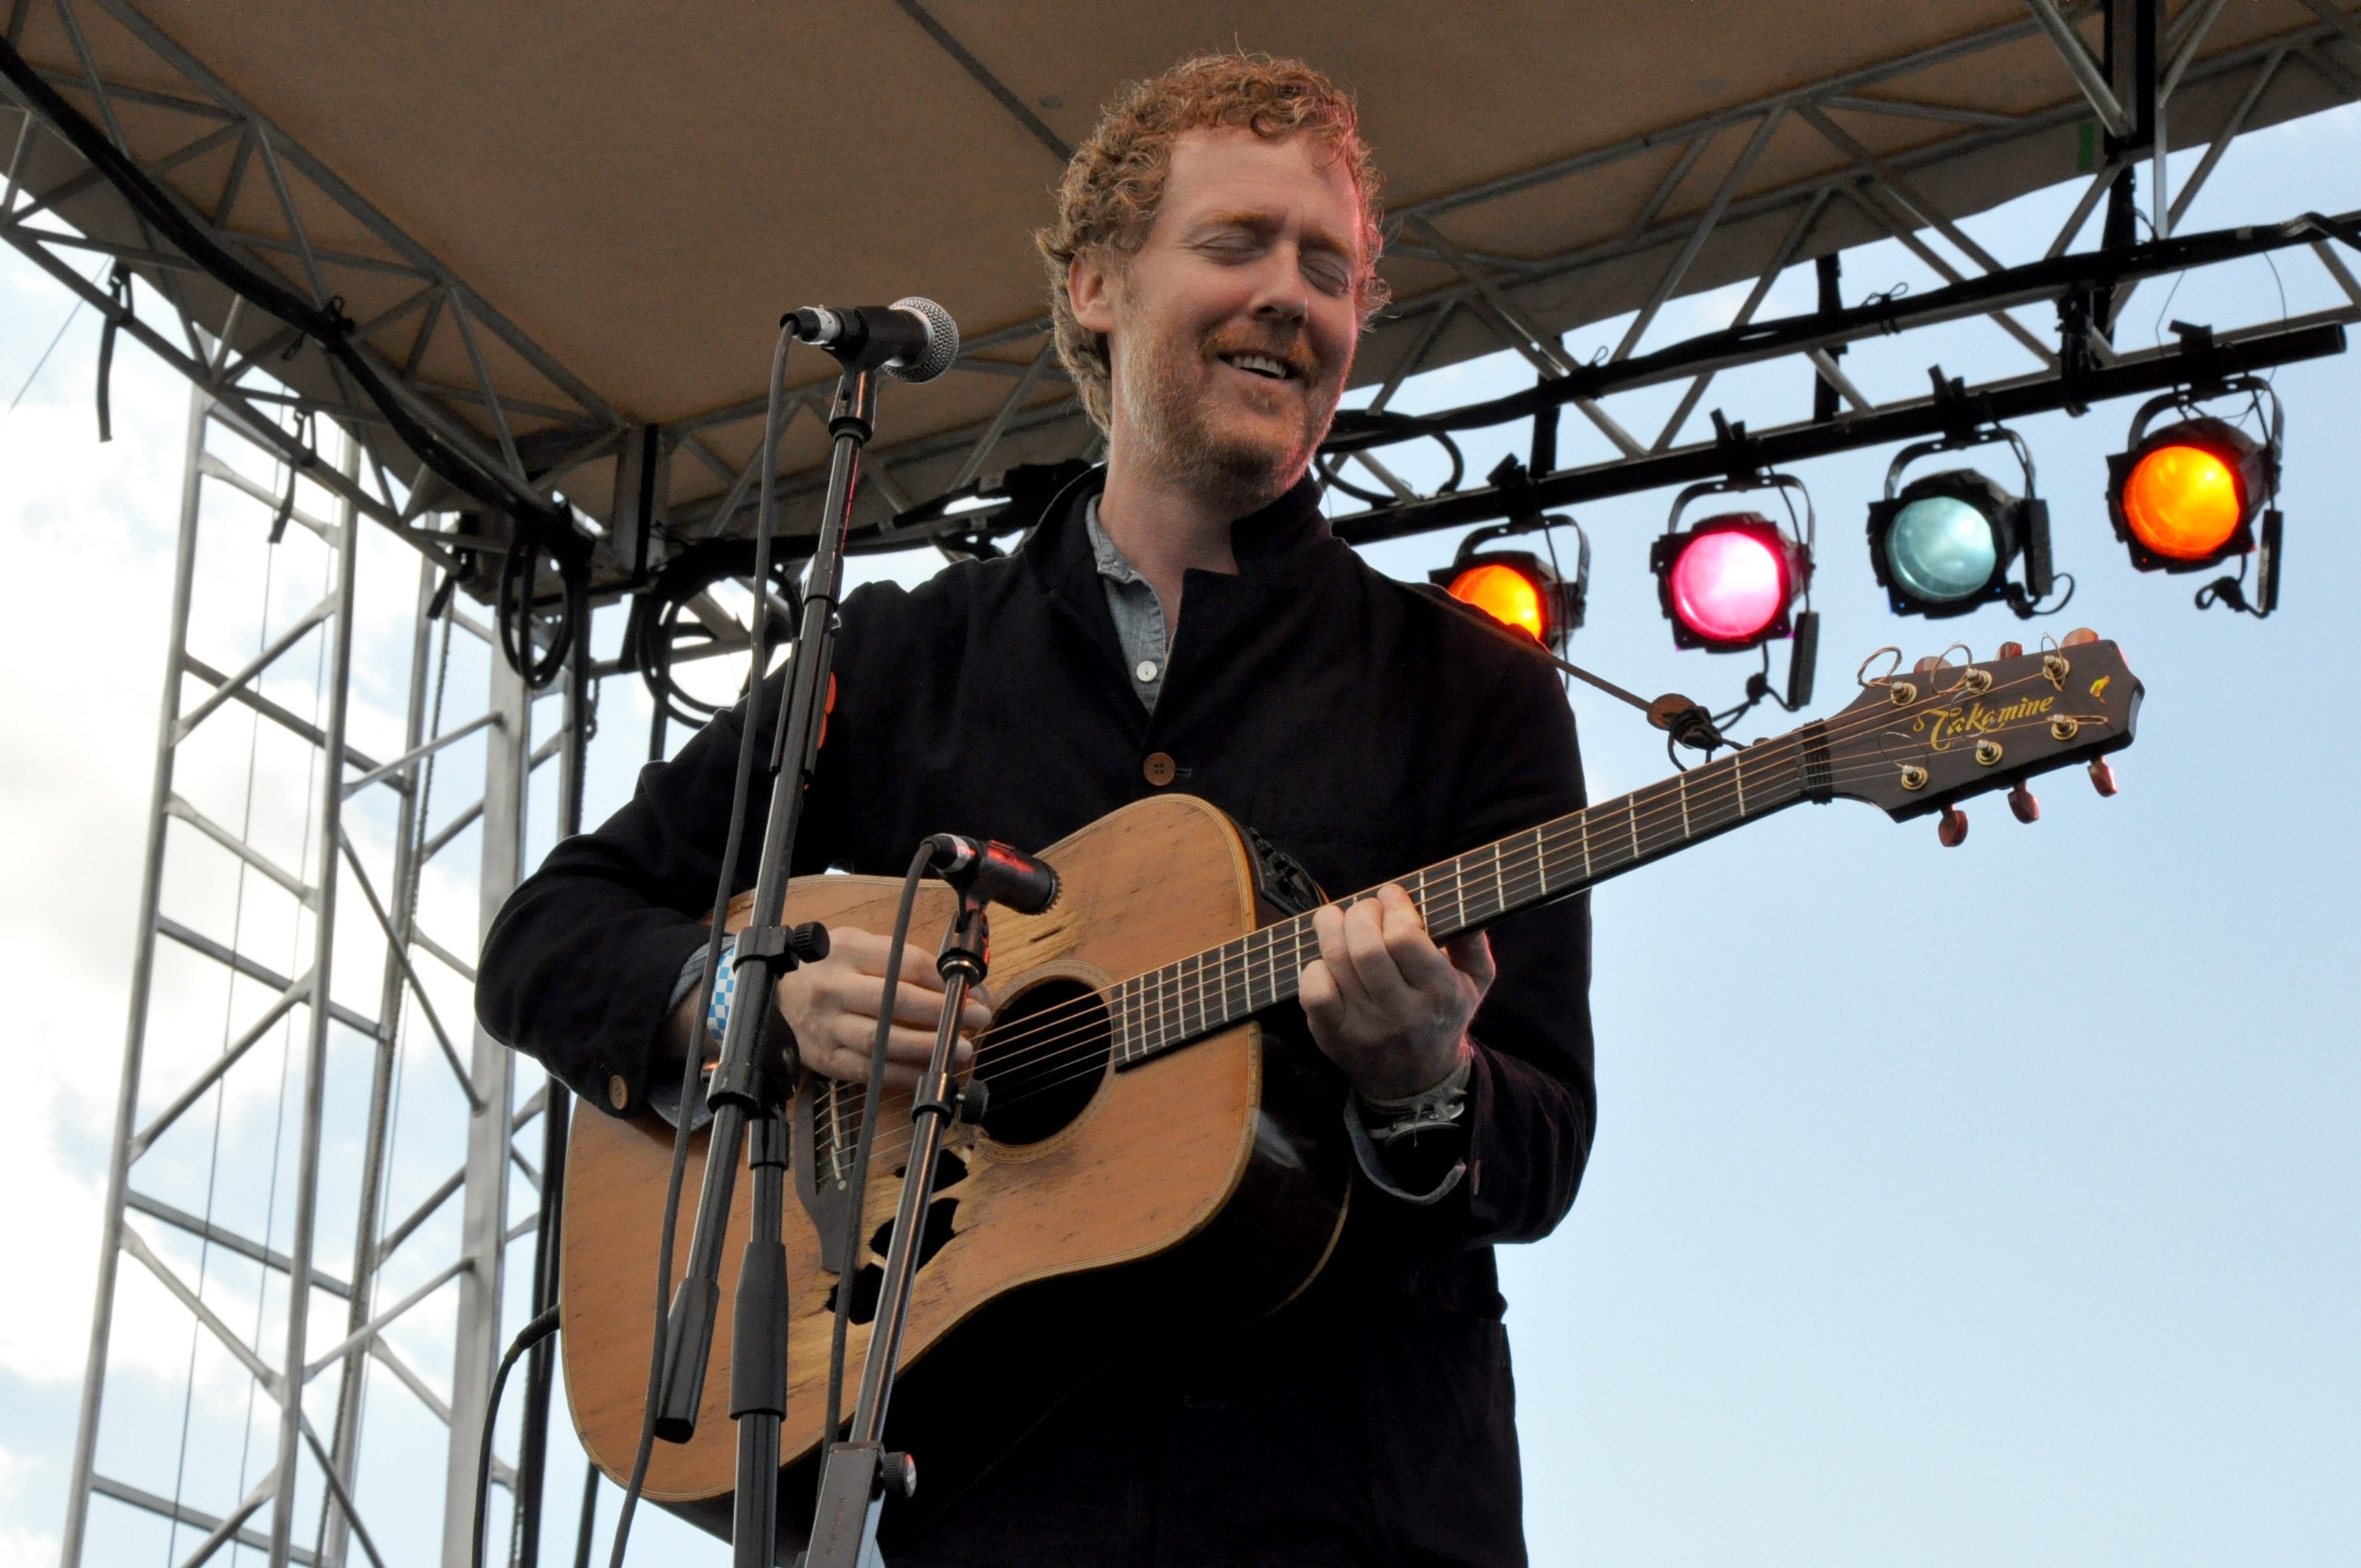 Glen Hansard Announces New Solo LP Between Two Shores for January 2018 Release And Shares First Single "Time Will Be The Healer"